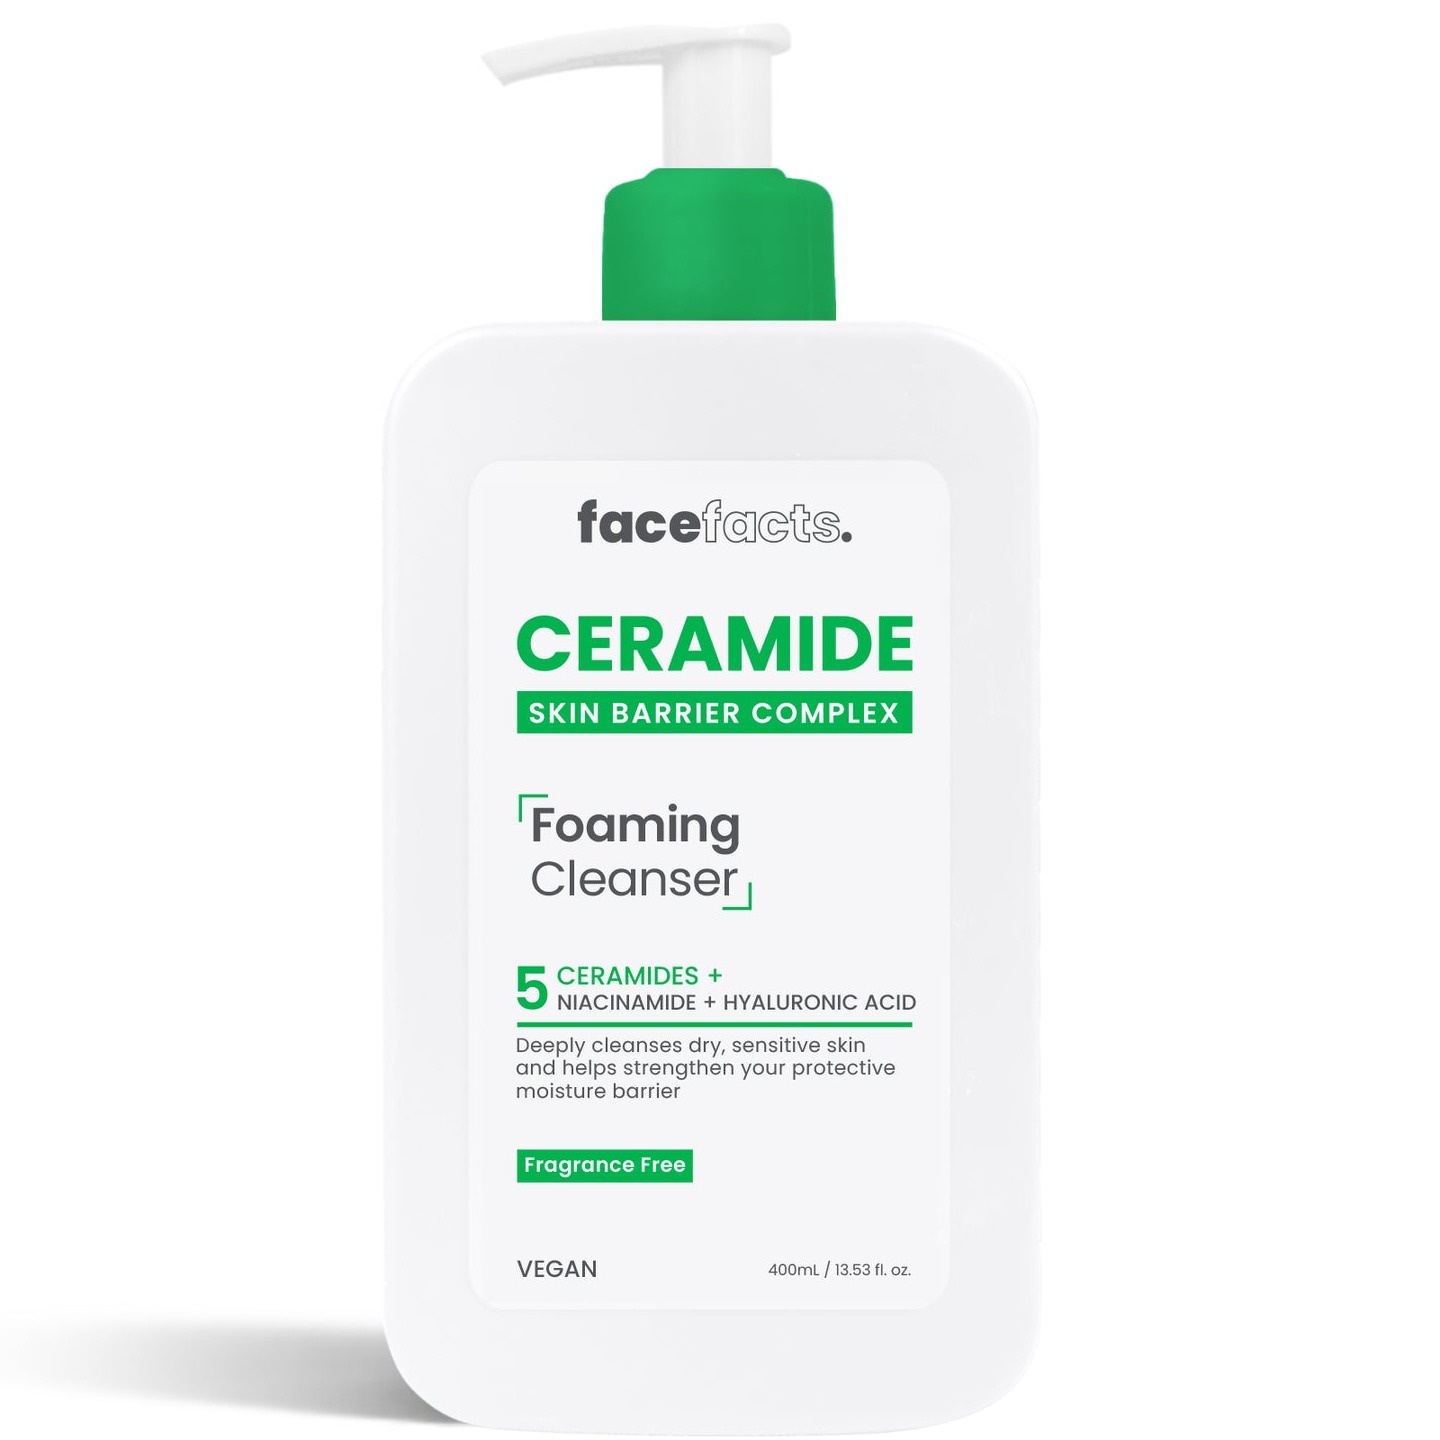 Face facts Ceramide Foaming Cleanser